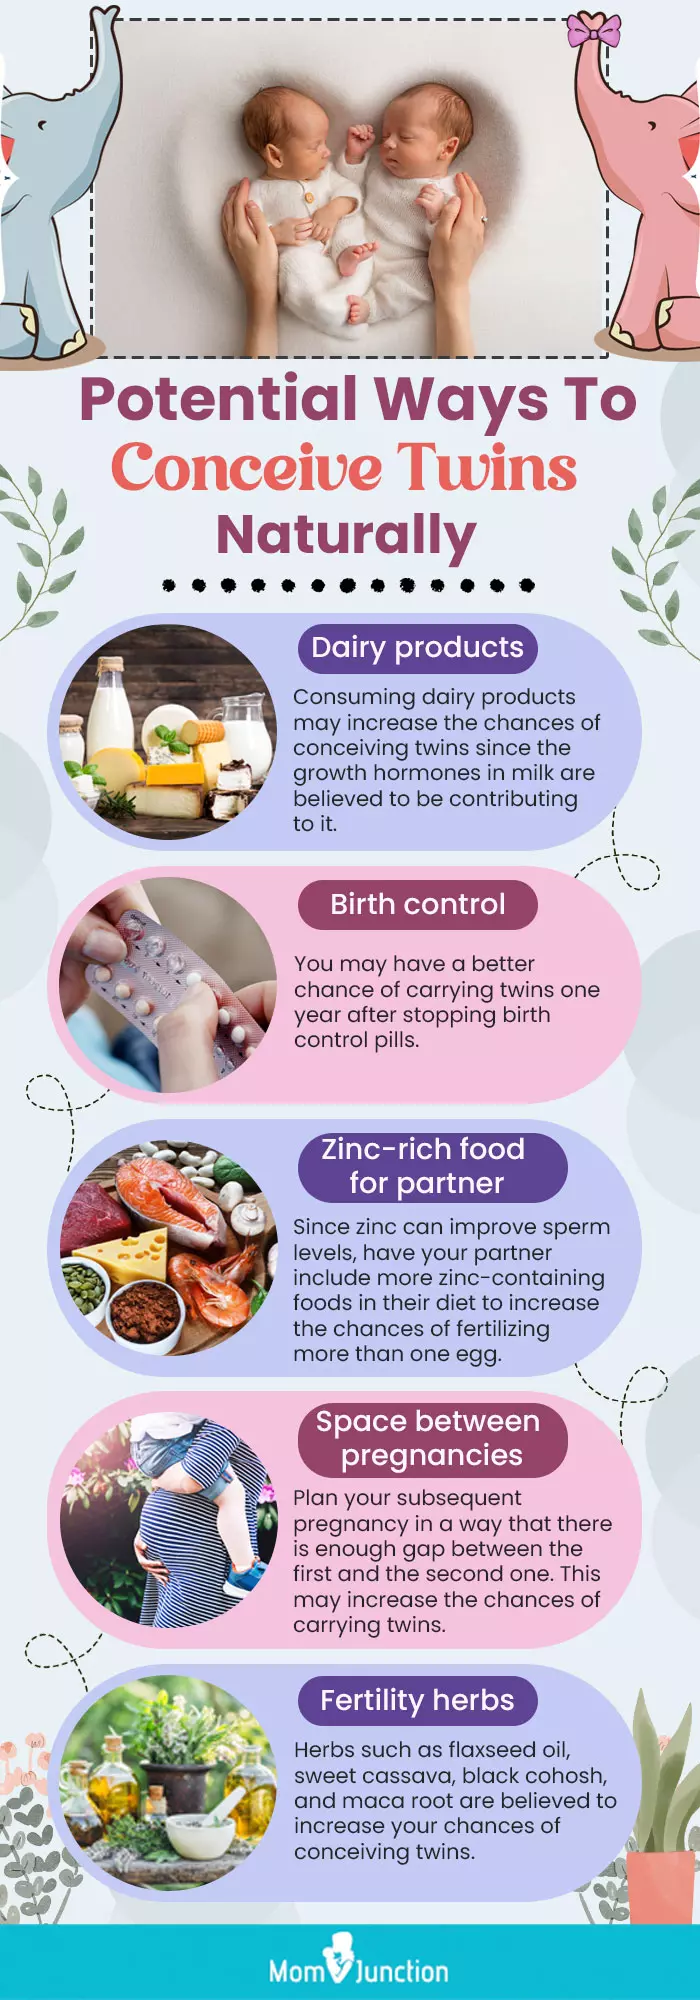 potential ways to conceive twins naturally (infographic)